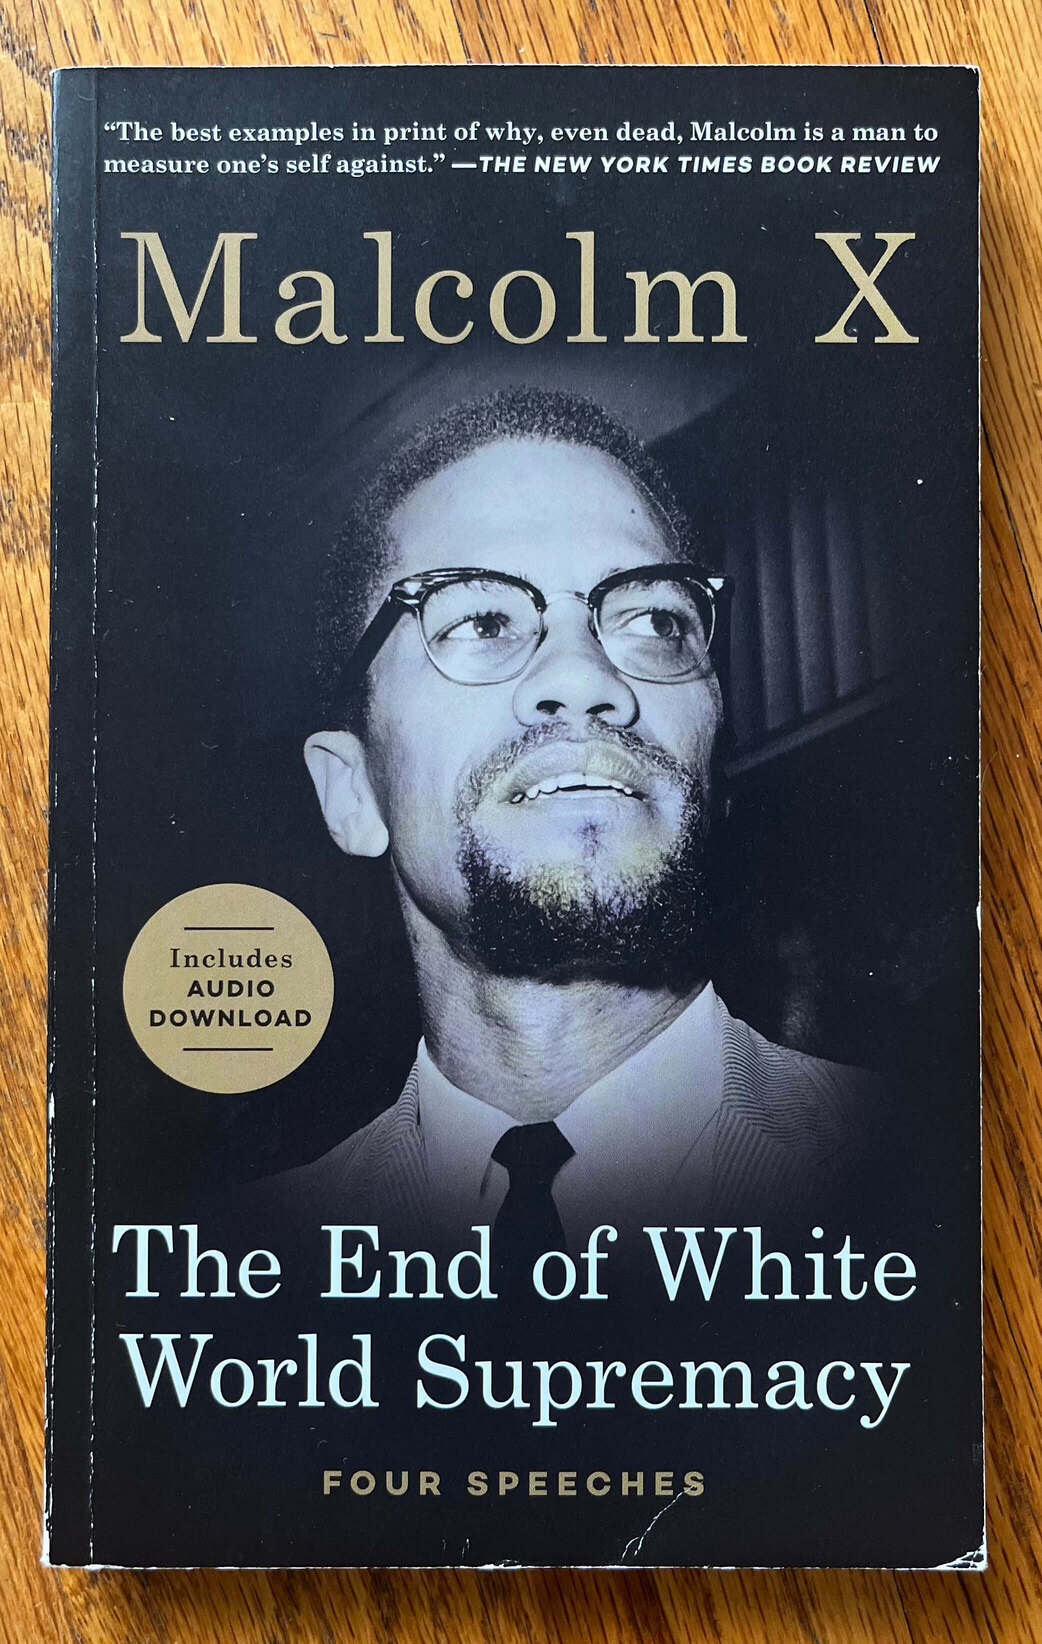 “The End of White World Supremacy: Four Speeches” by Malcom X.